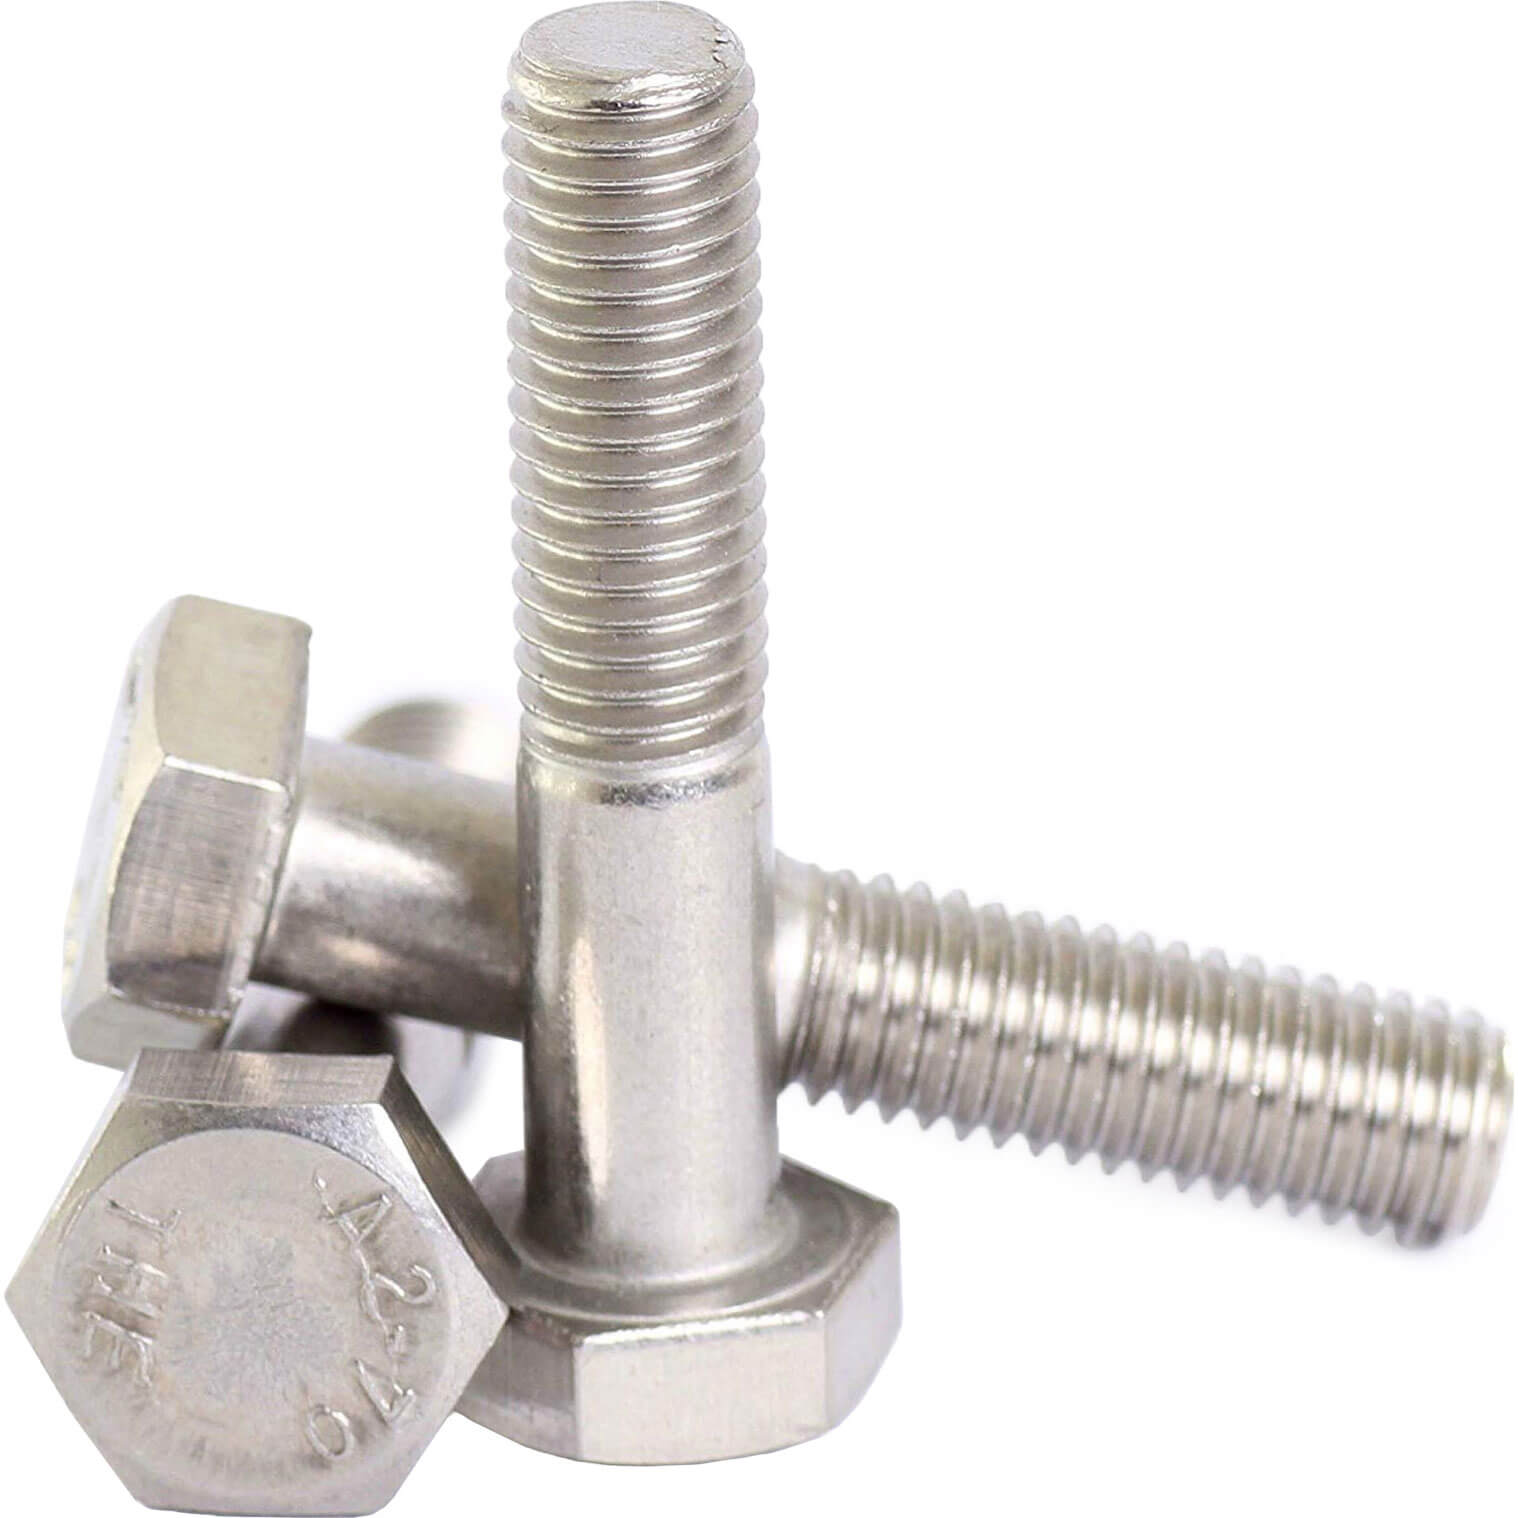 Image of Sirius Bolts A2 304 Stainless Steel M20 110mm Pack of 1